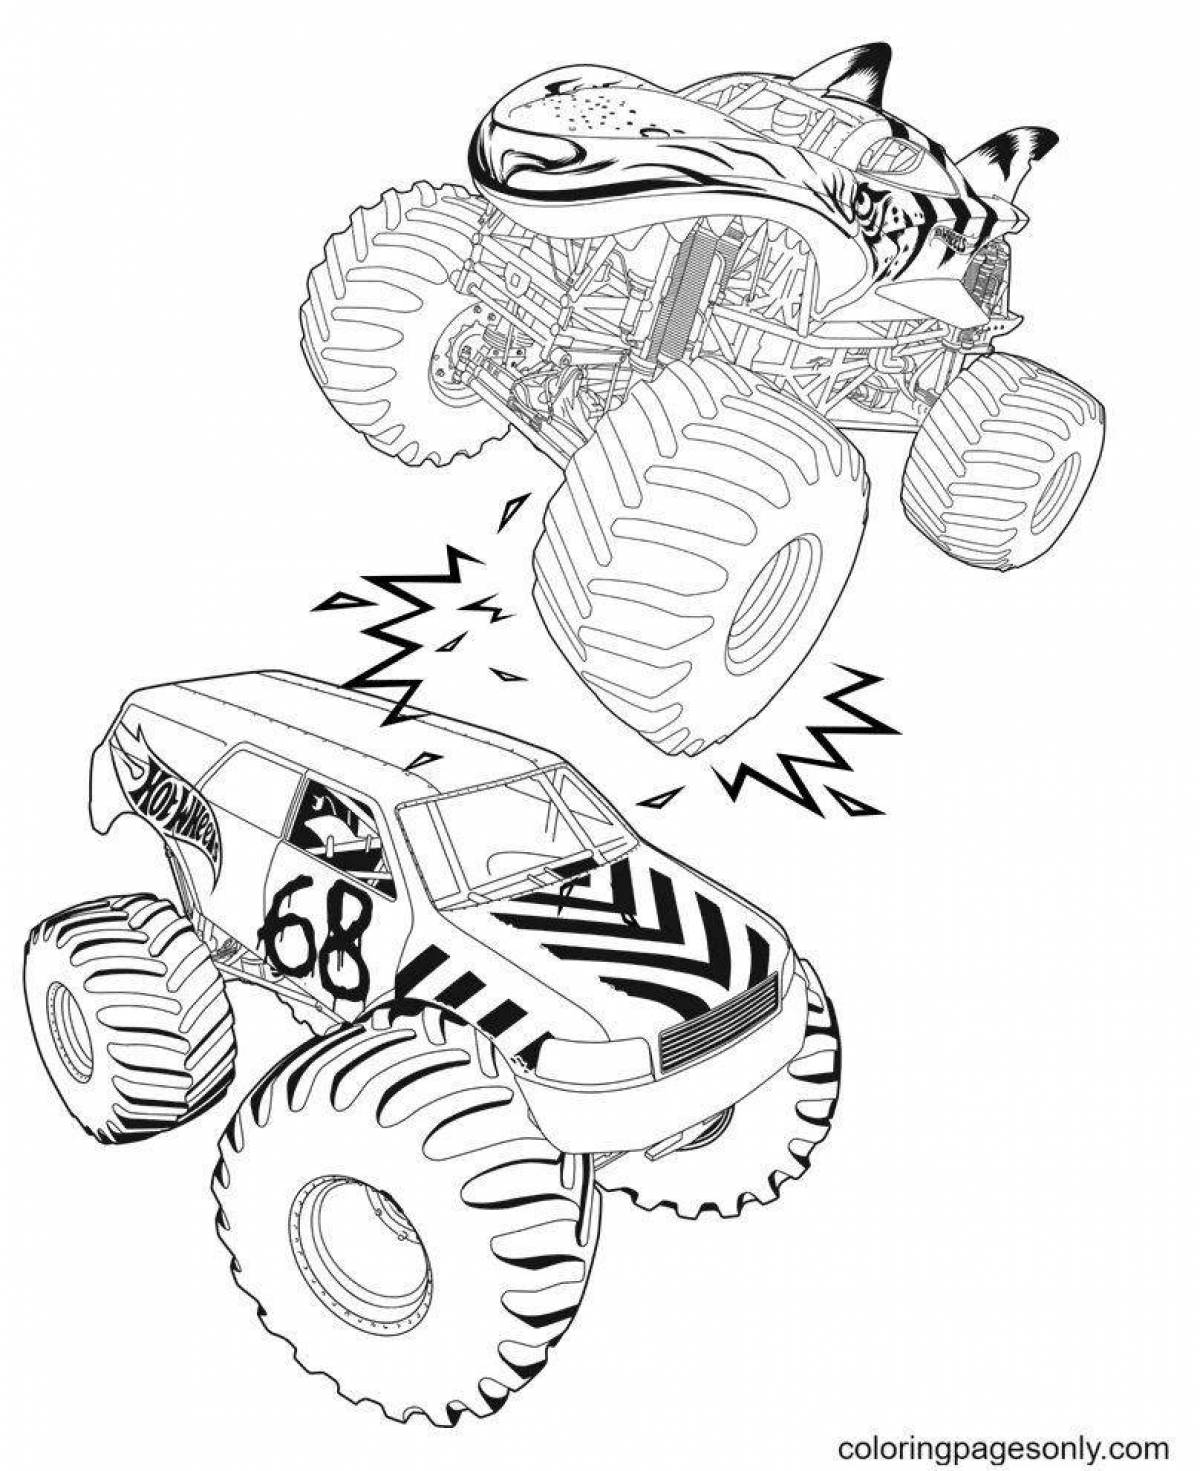 Monster truck hot wheels incredible coloring page